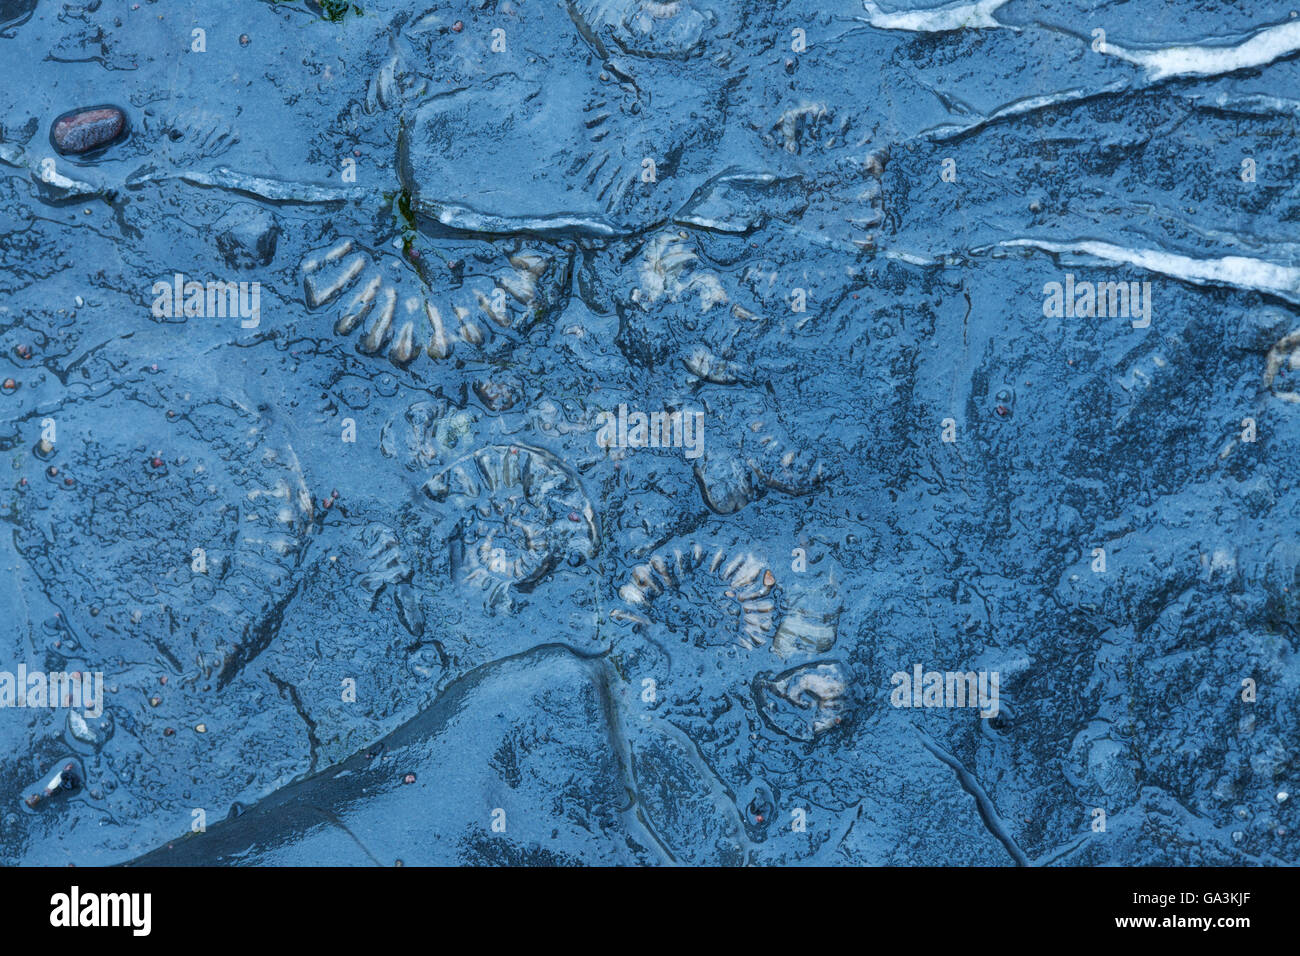 Ammonite fossils of various sizes in shale, at the northeastern end of Kilve Beach, Somerset, England, United Kingdom, Europe Stock Photo